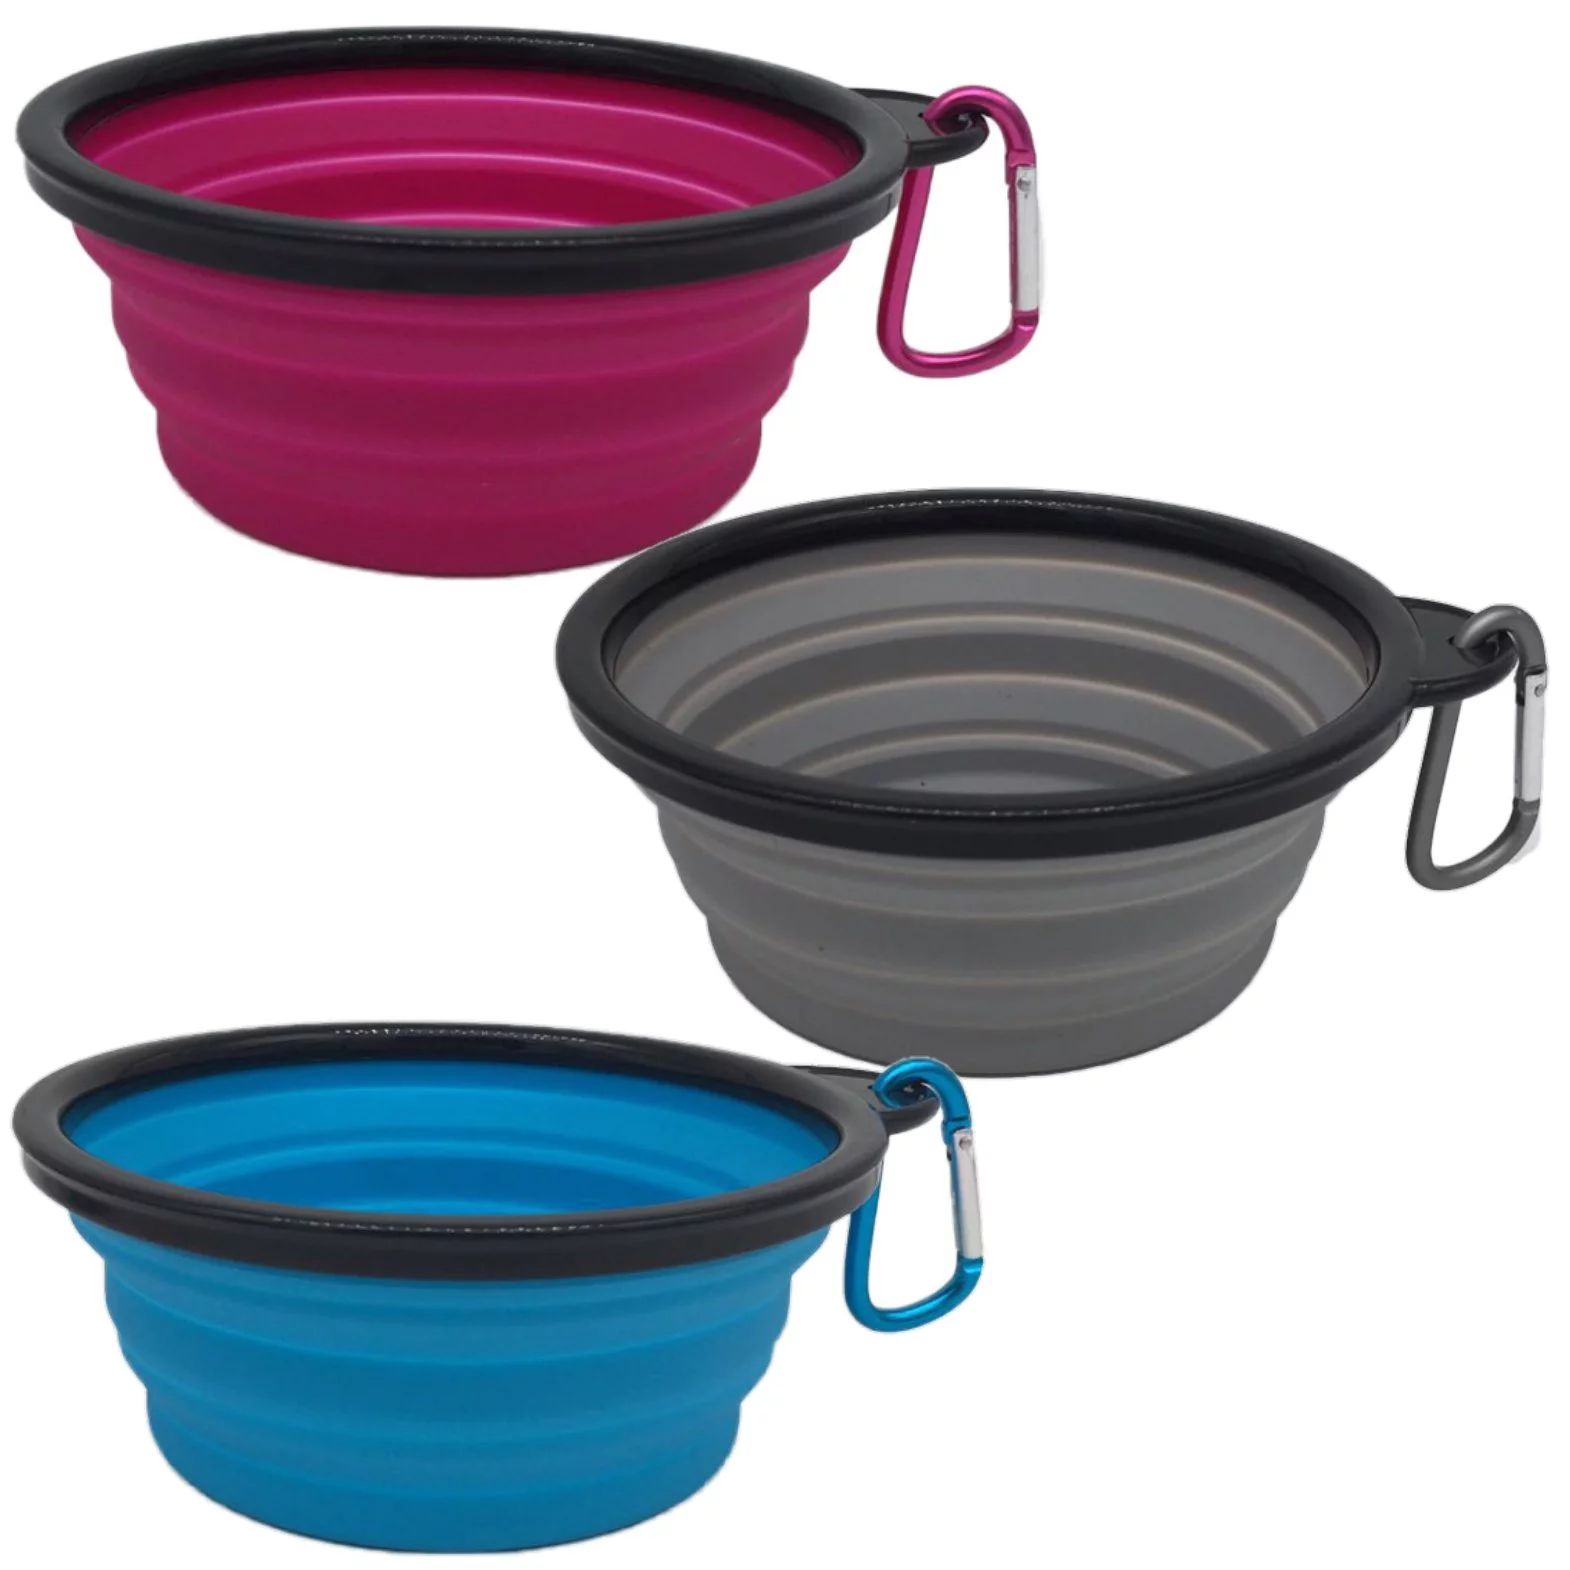 Mr. Peanut's 3 Pak XL (25oz) Collapsible Silicone Bowls with Color Matched Carabiner Clips | Walmart (US)